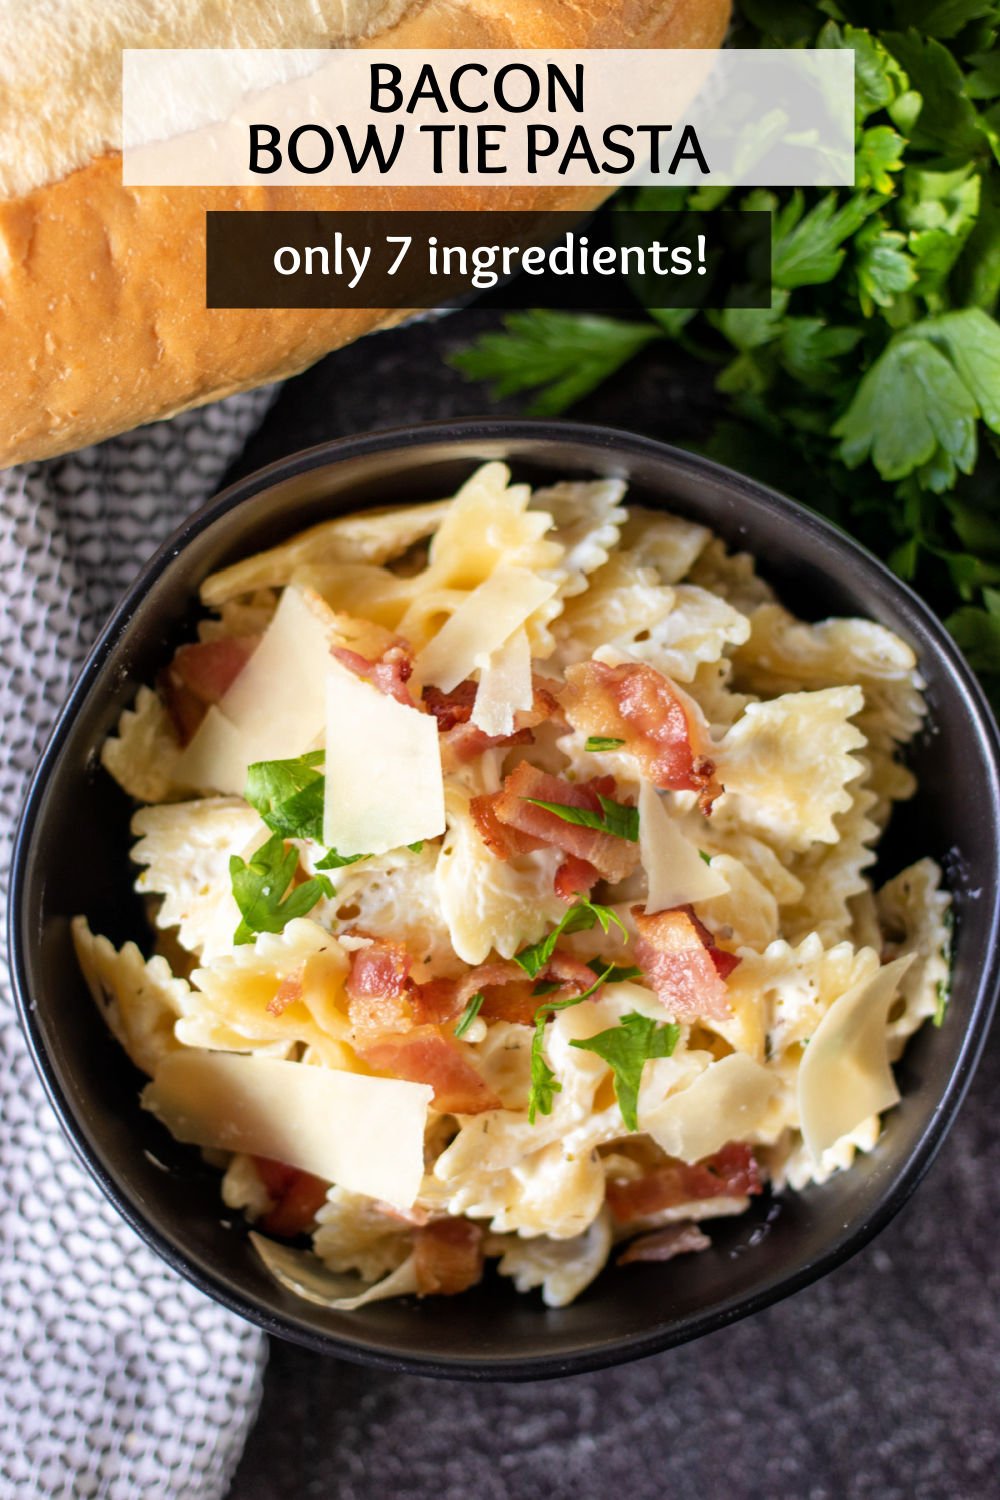 Creamy Bow Tie Pasta with bacon is simple comfort food that is easy to customize with grilled chicken, veggies, or delicious as is. With only seven ingredients and 30 minutes, you can have a family favorite on the table. | www.persnicketyplates.com